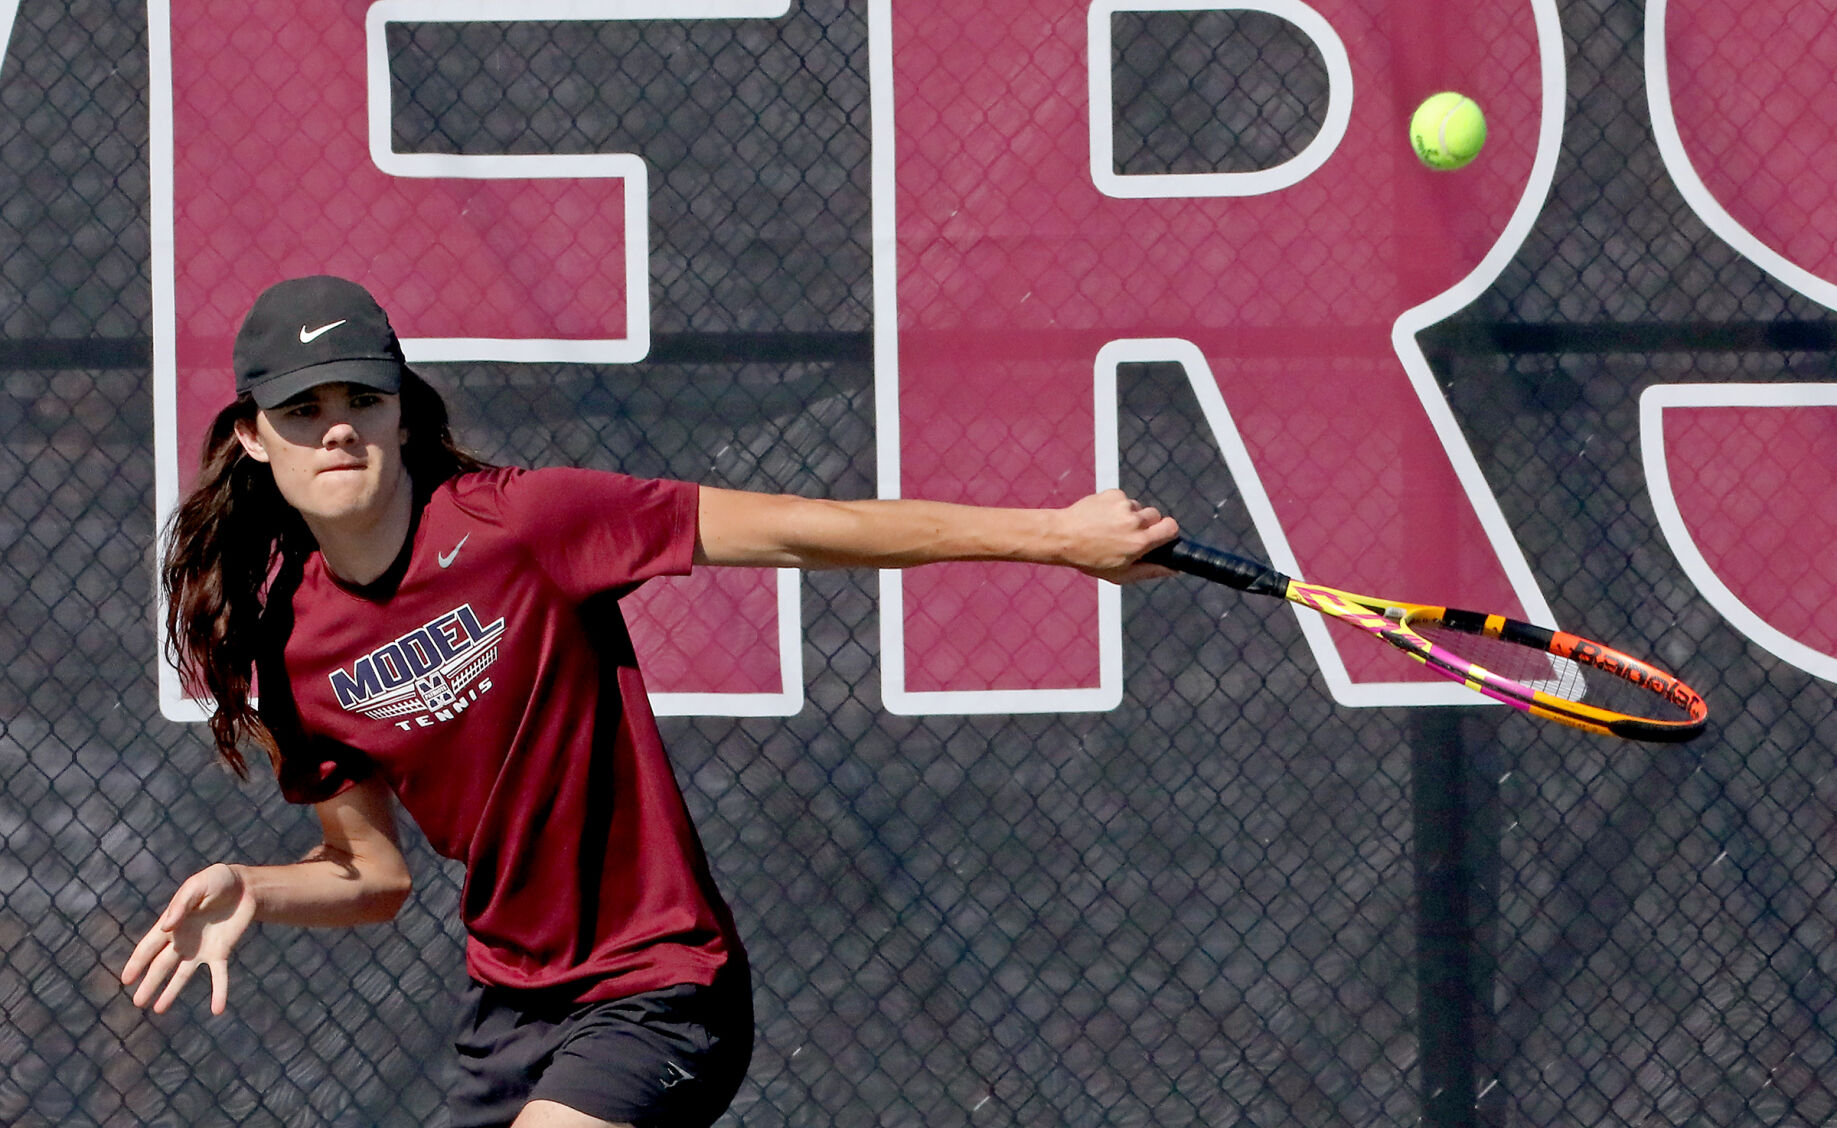 HIGH SCHOOL TENNIS: Model sweeps Southern; LCA tops Central